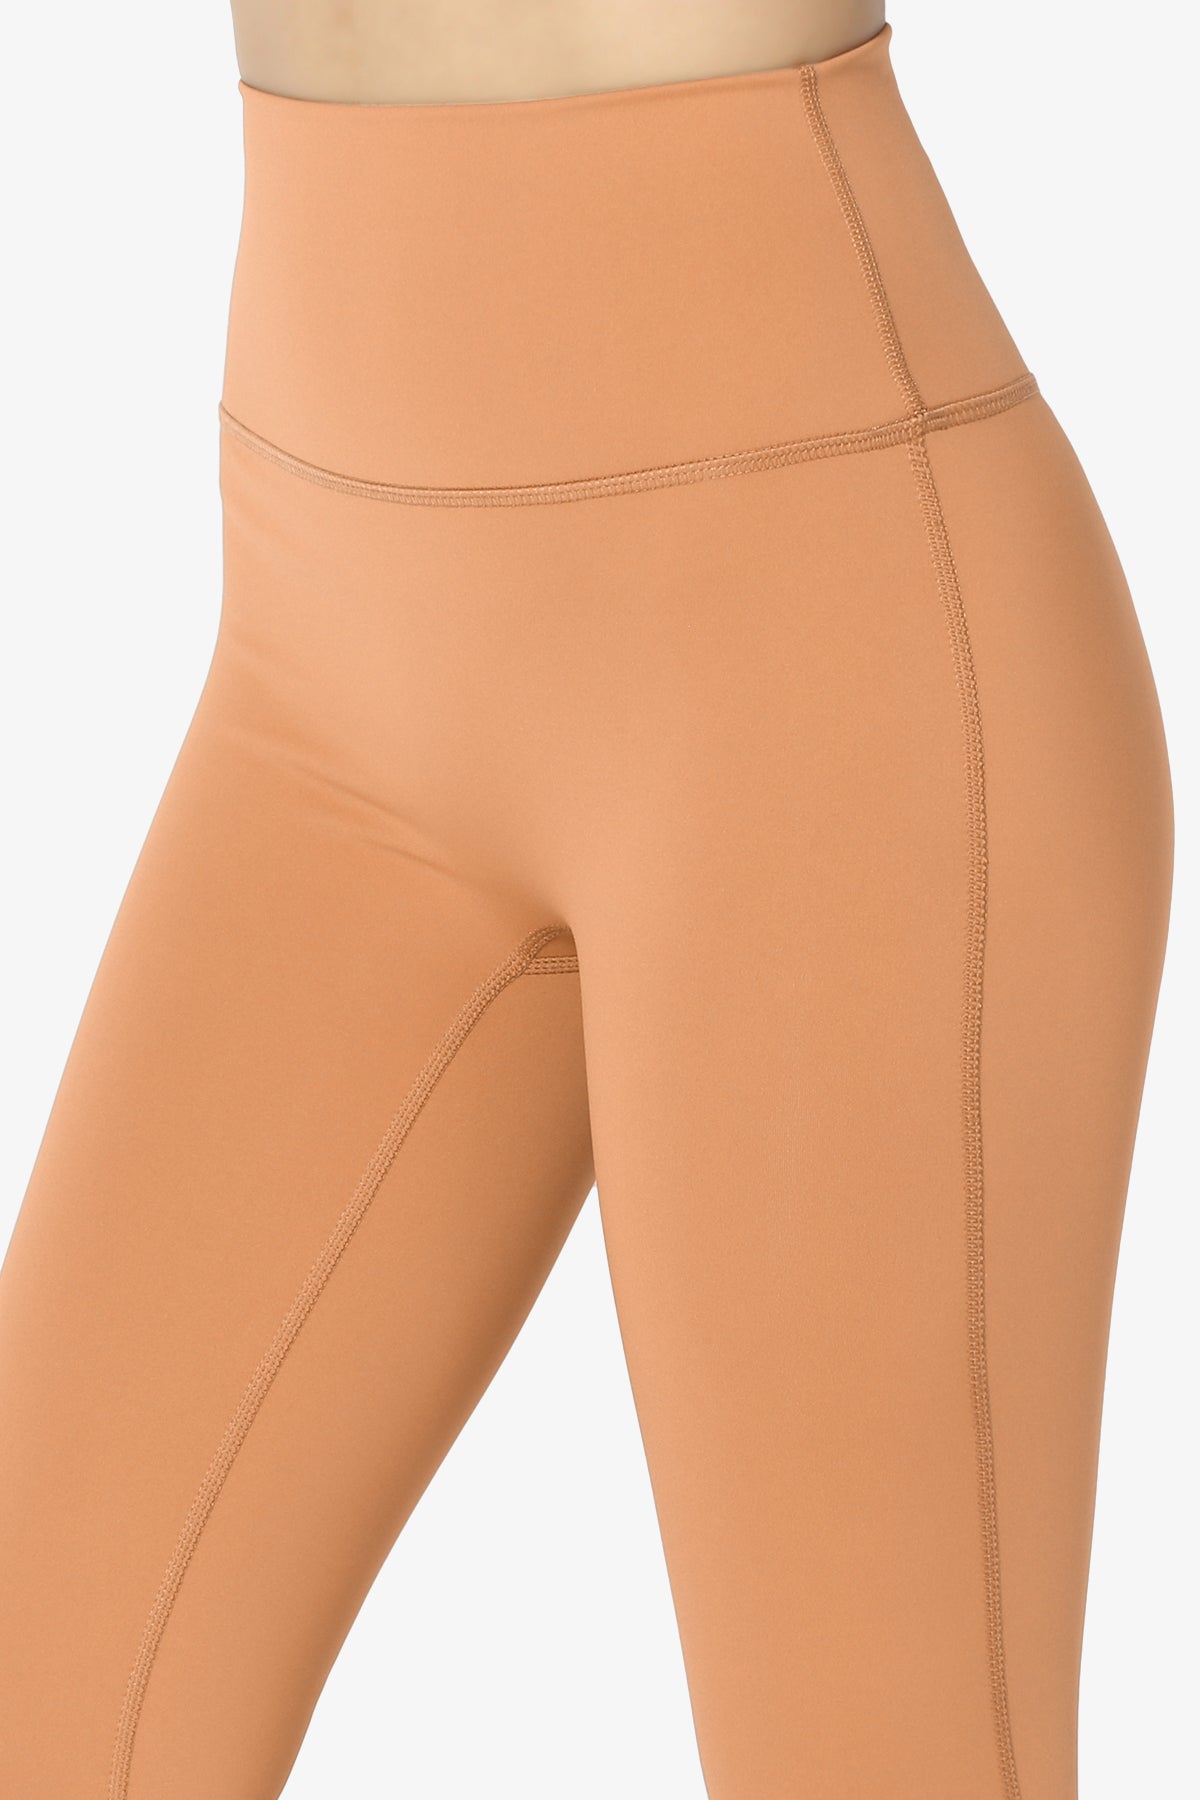 Load image into Gallery viewer, Mosco Athletic Tummy Control Workout Leggings BUTTER ORANGE_5
